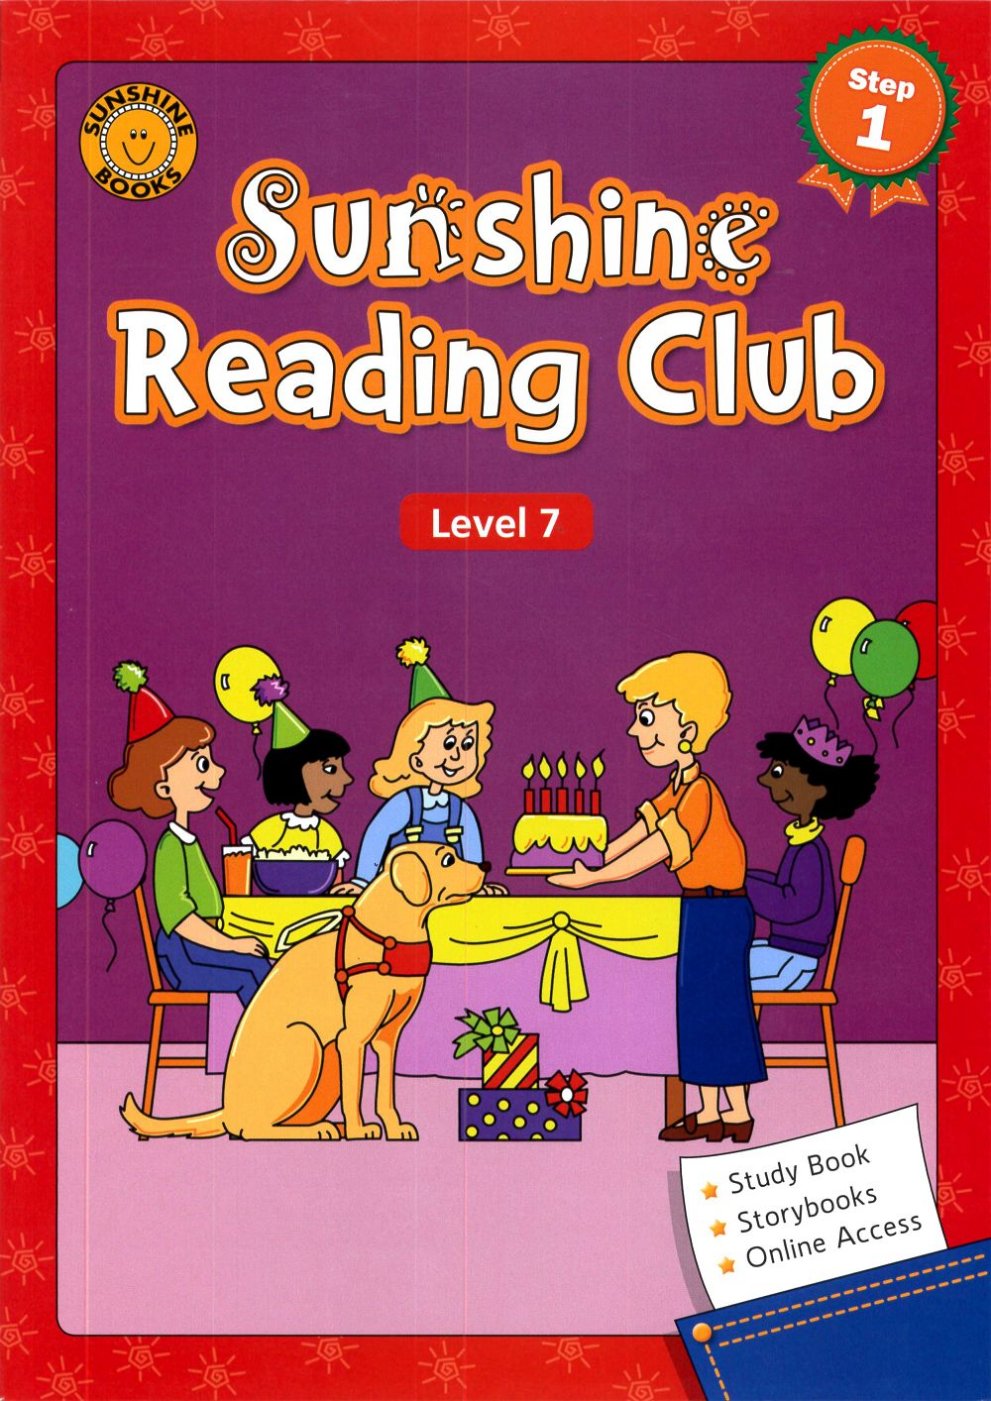 Sunshine Reading Club Level 07 Study Book with Storybooks and Online Access Code